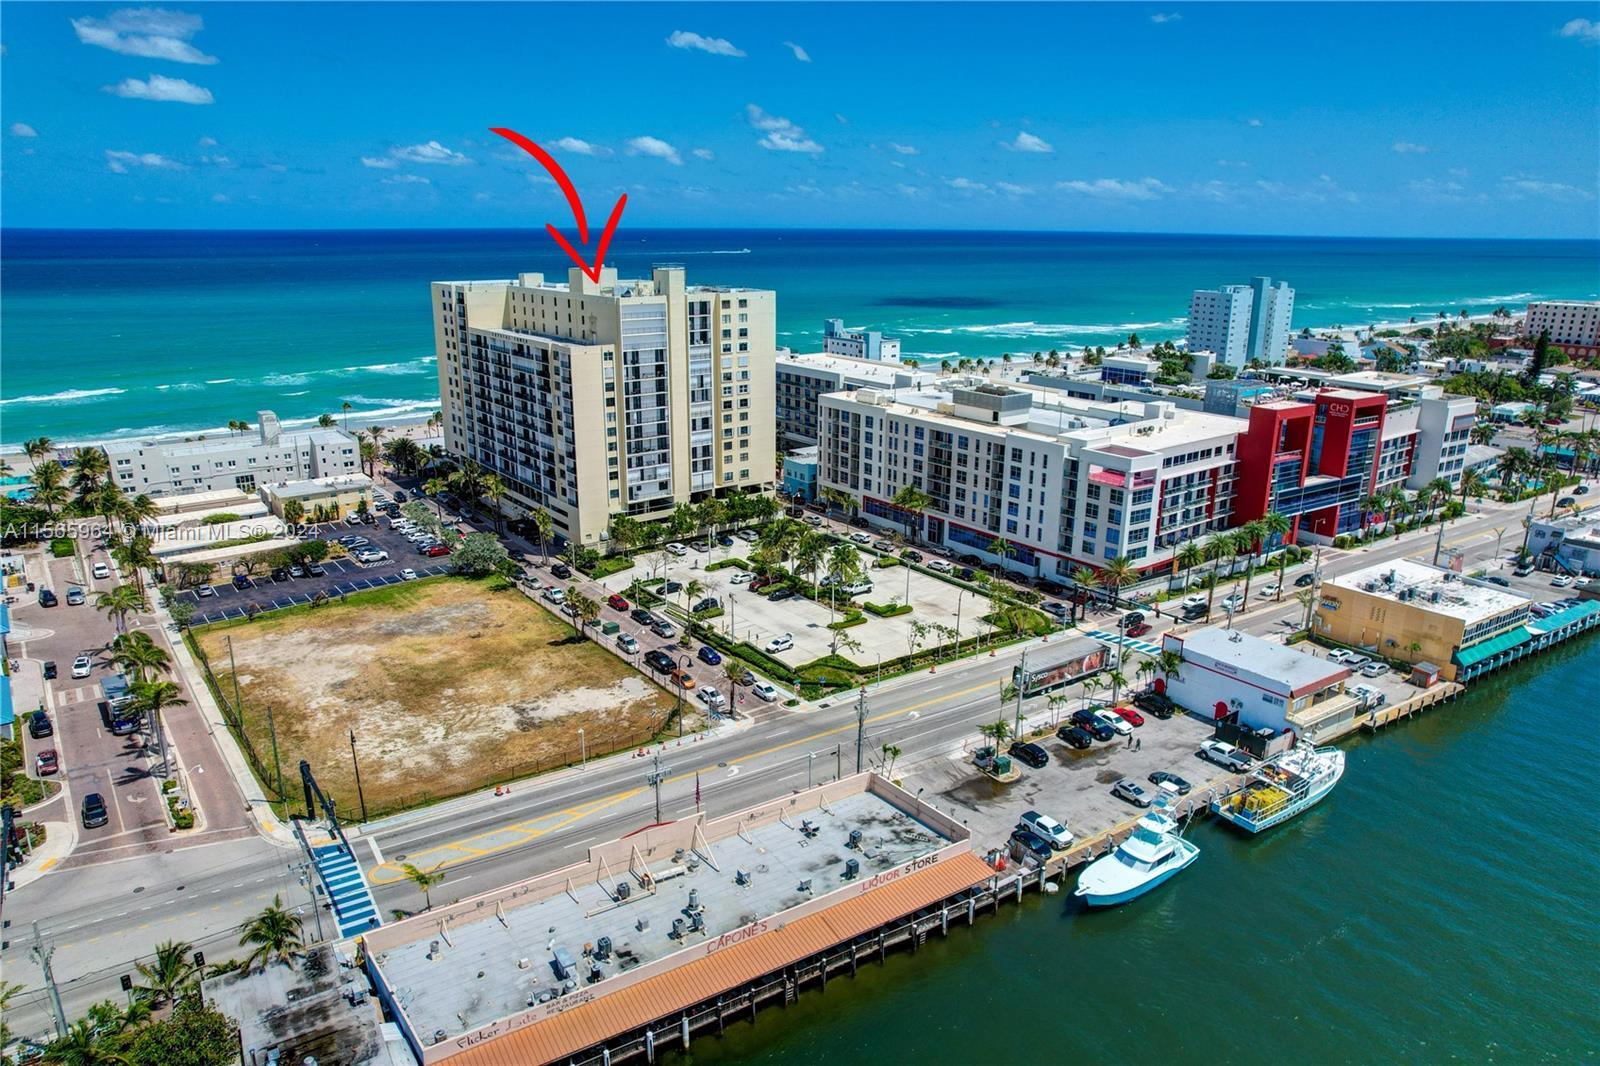 Experience breathtaking Intracoastal and oceanfront views from this stunning unit directly situated 